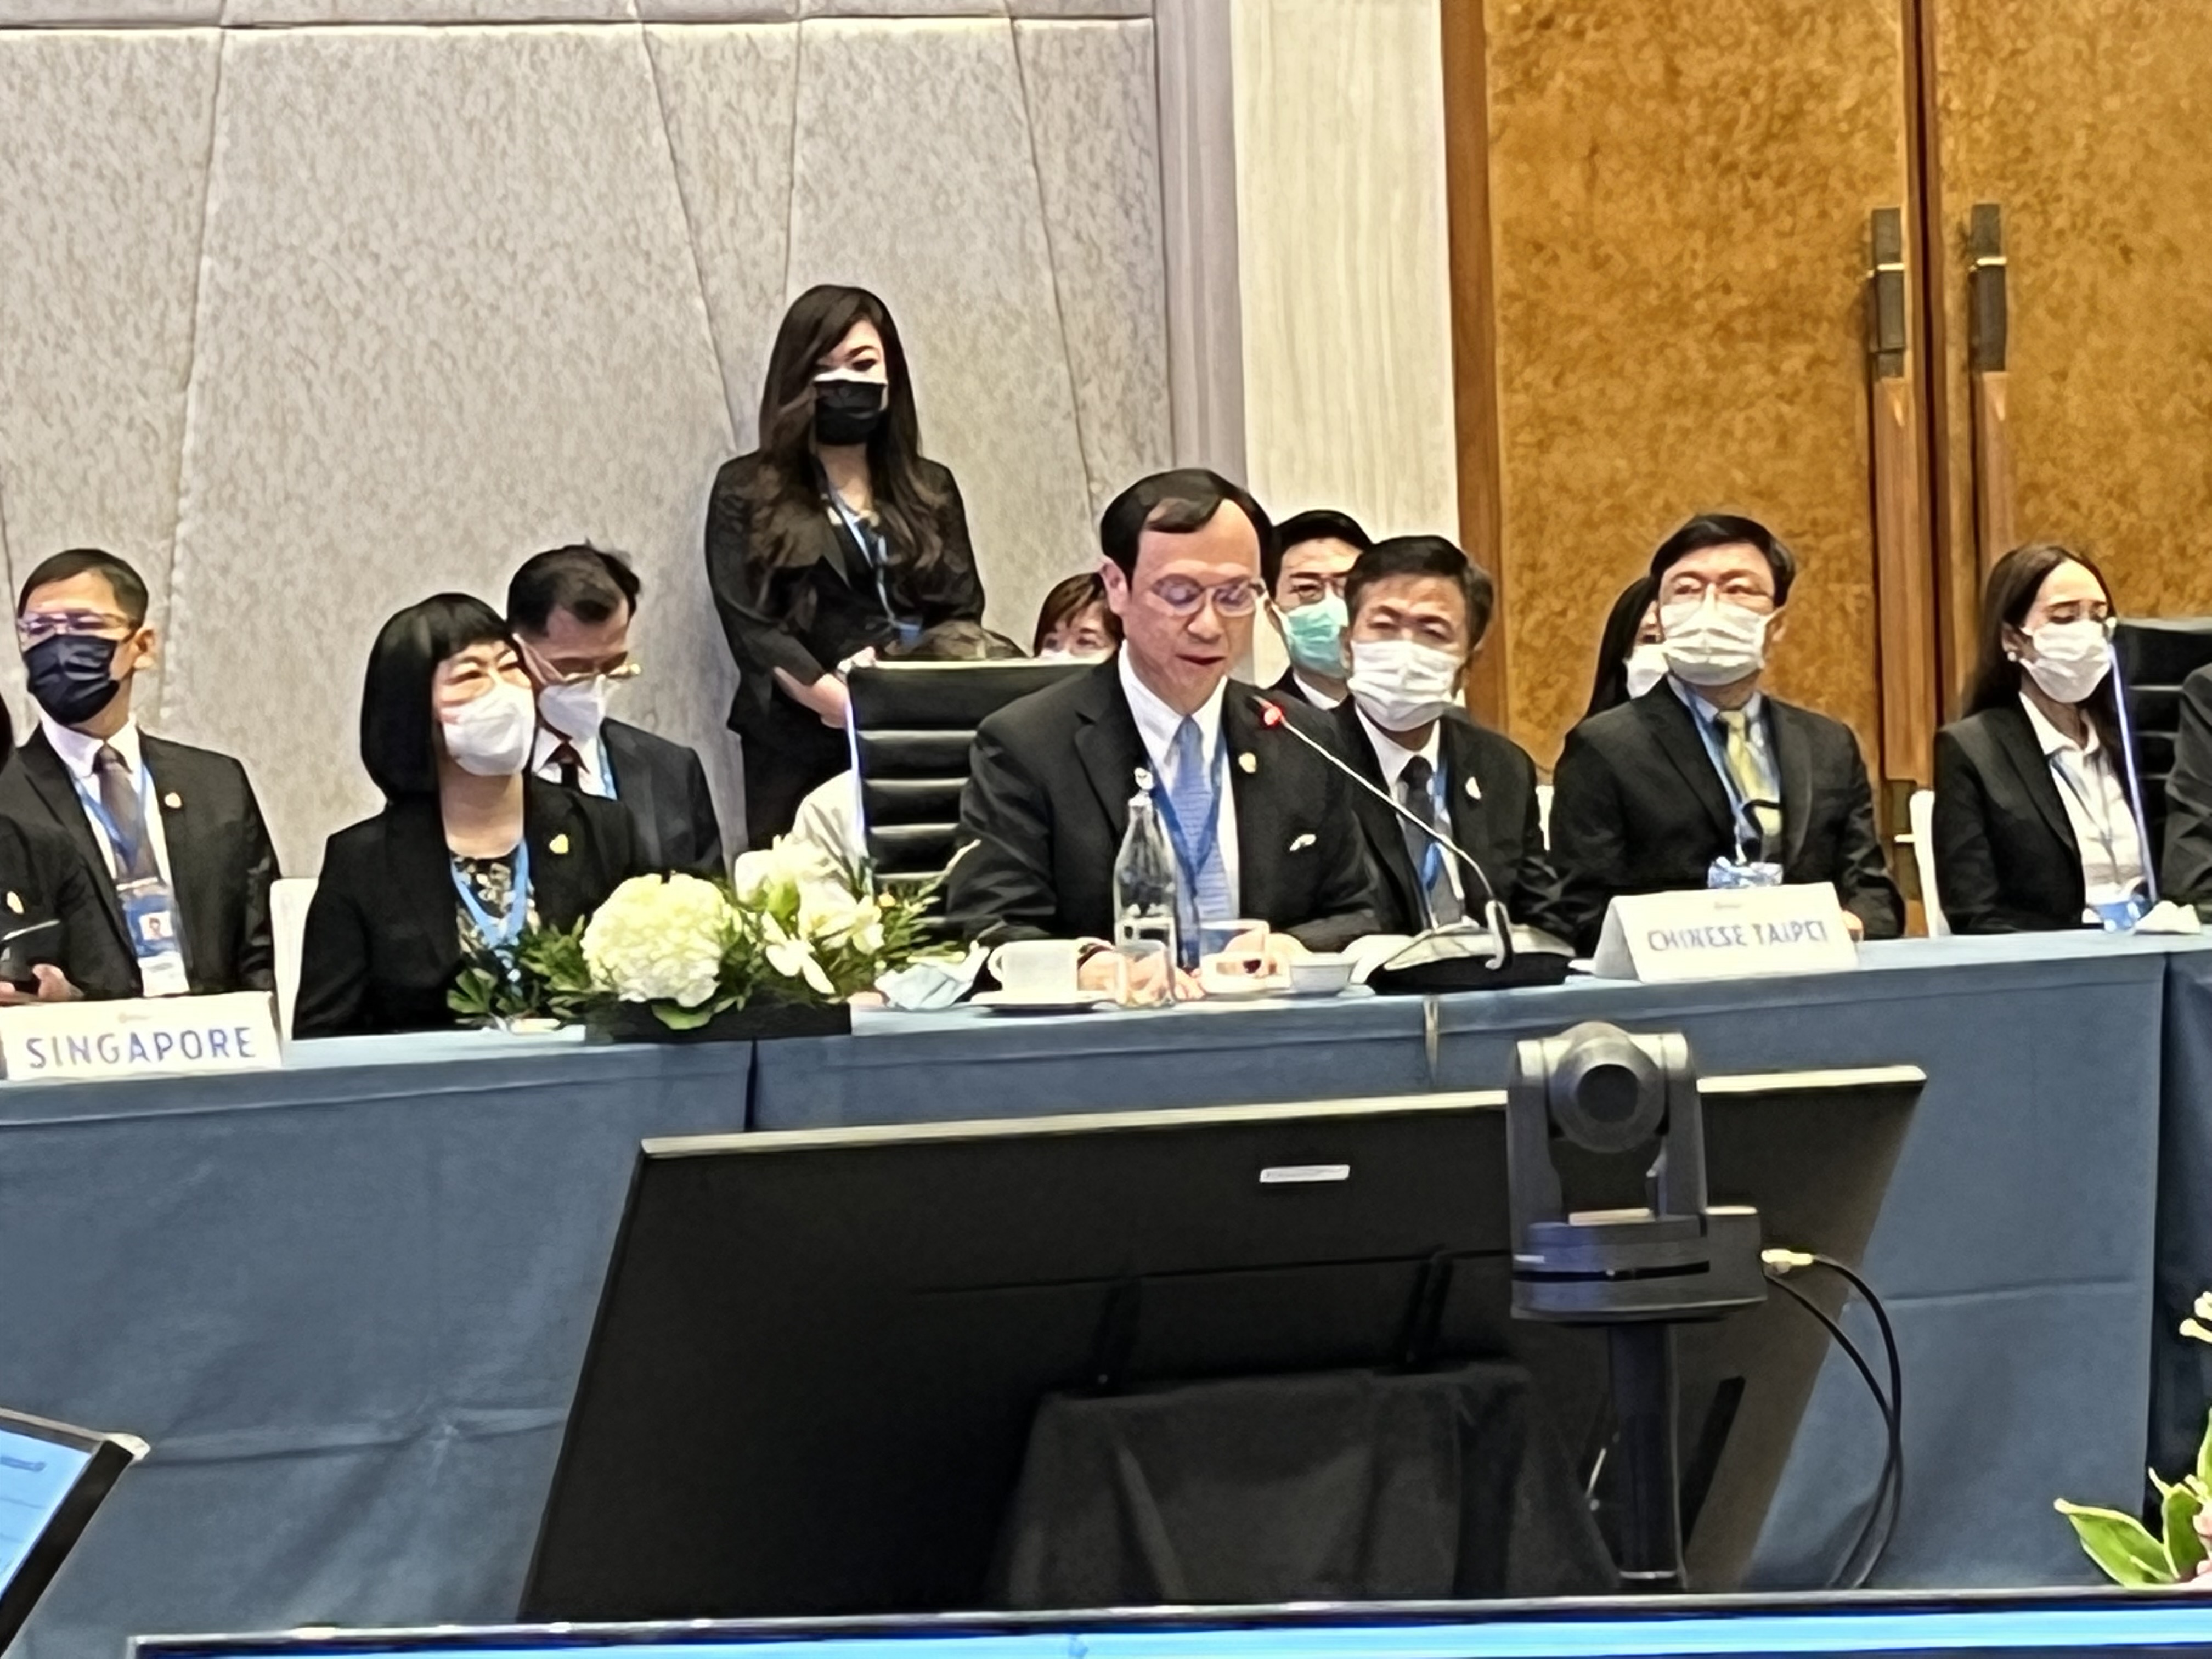 Deputy Minister Chung-Liang Shih of the Ministry of Health and Welfare attended the APEC High-Level Meeting on Health and the Economy 2022 hosted by Bangkok, Thailand.